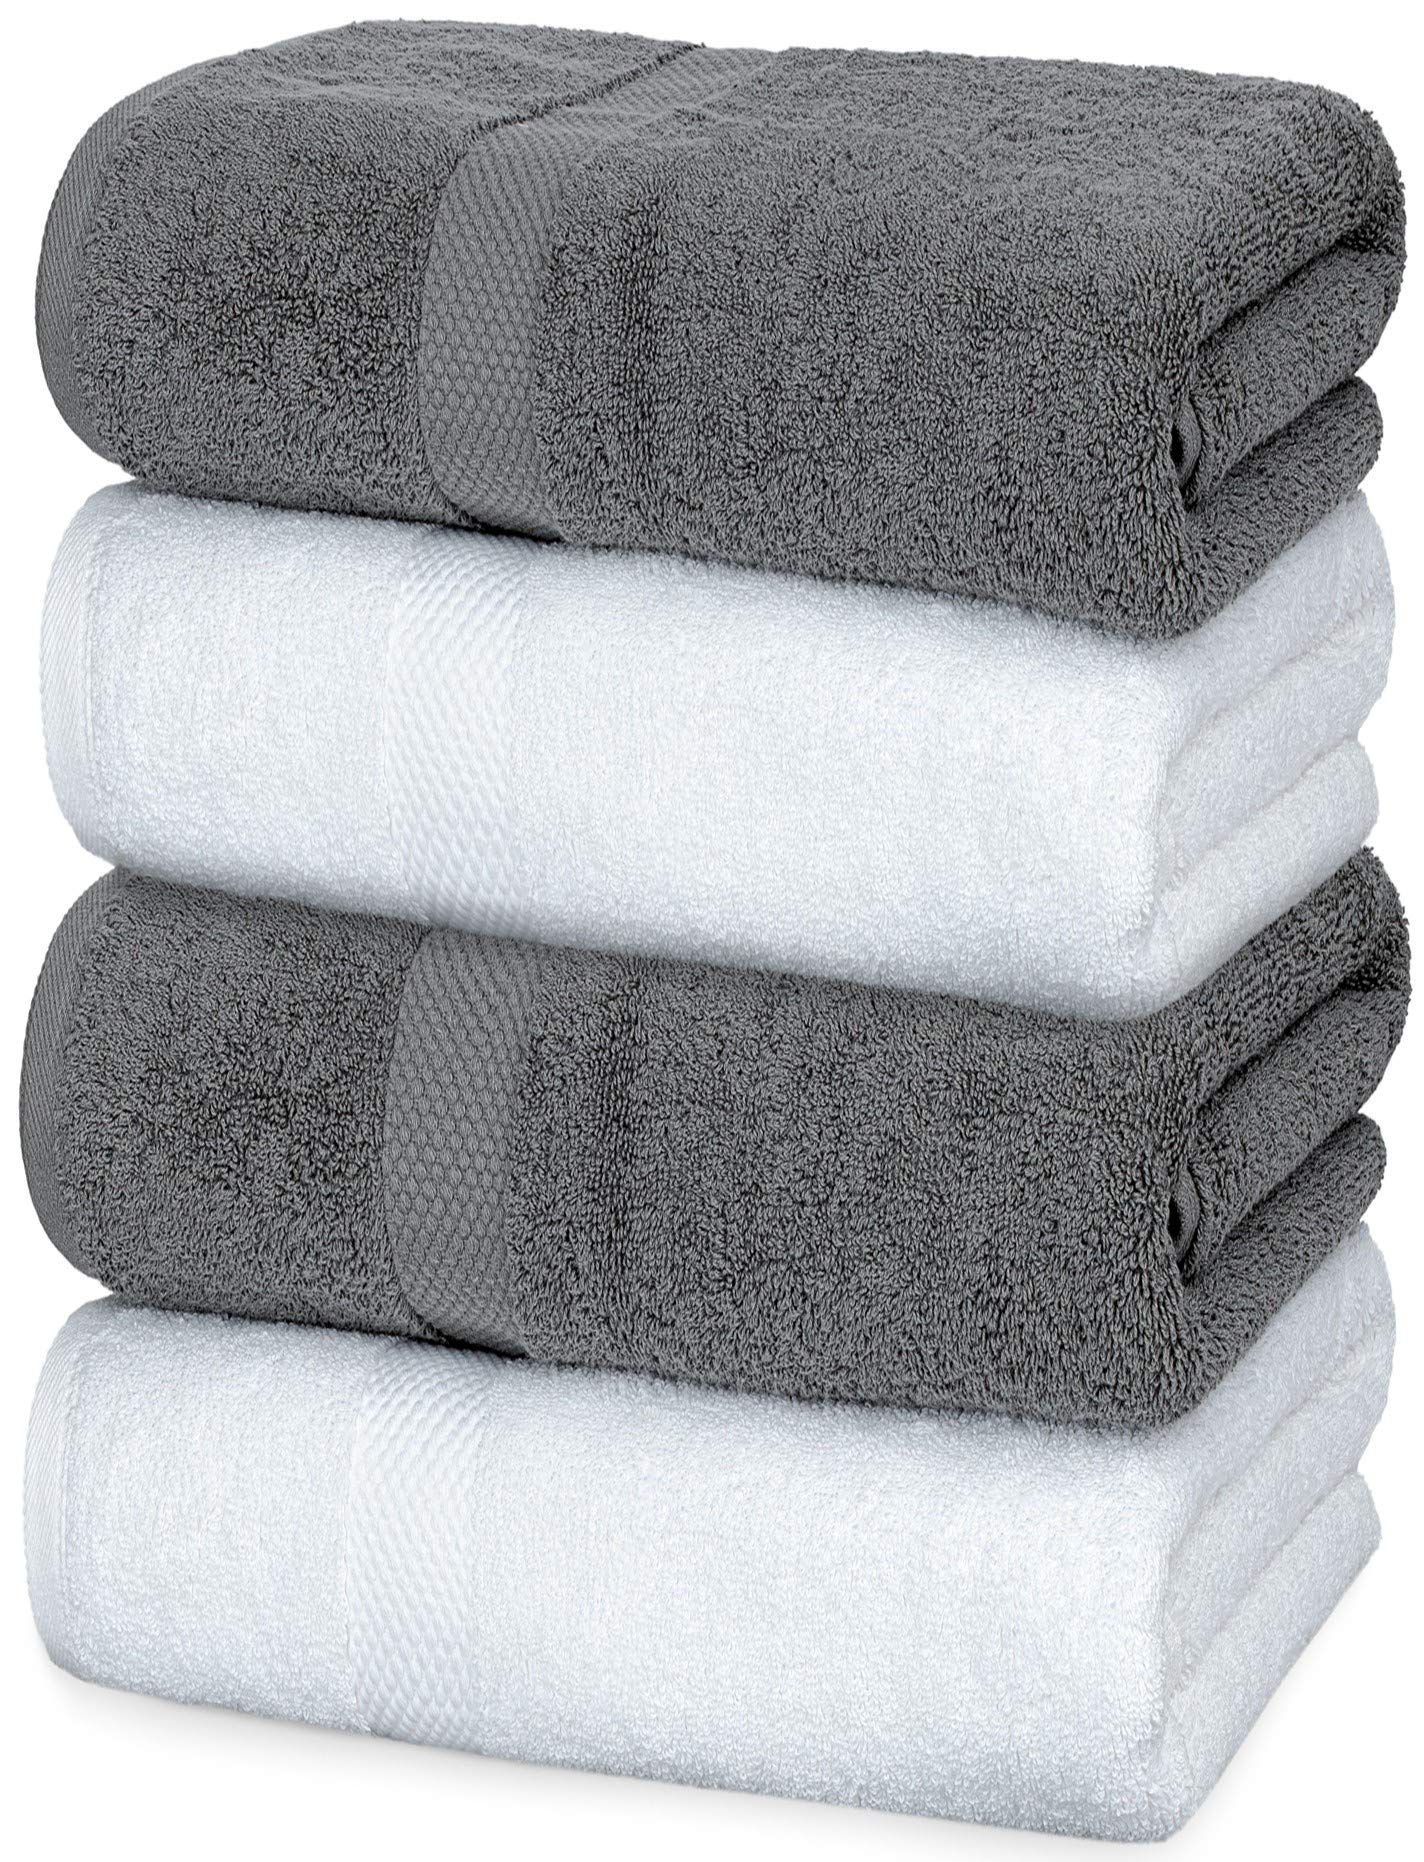 Luxury White Bath Towels Large - 100% Soft Cotton 700 GSM | Absorbent Hotel Bathroom Towel | 27 inch X 54 inch | Set of 4 | Grey/White  - Acceptable